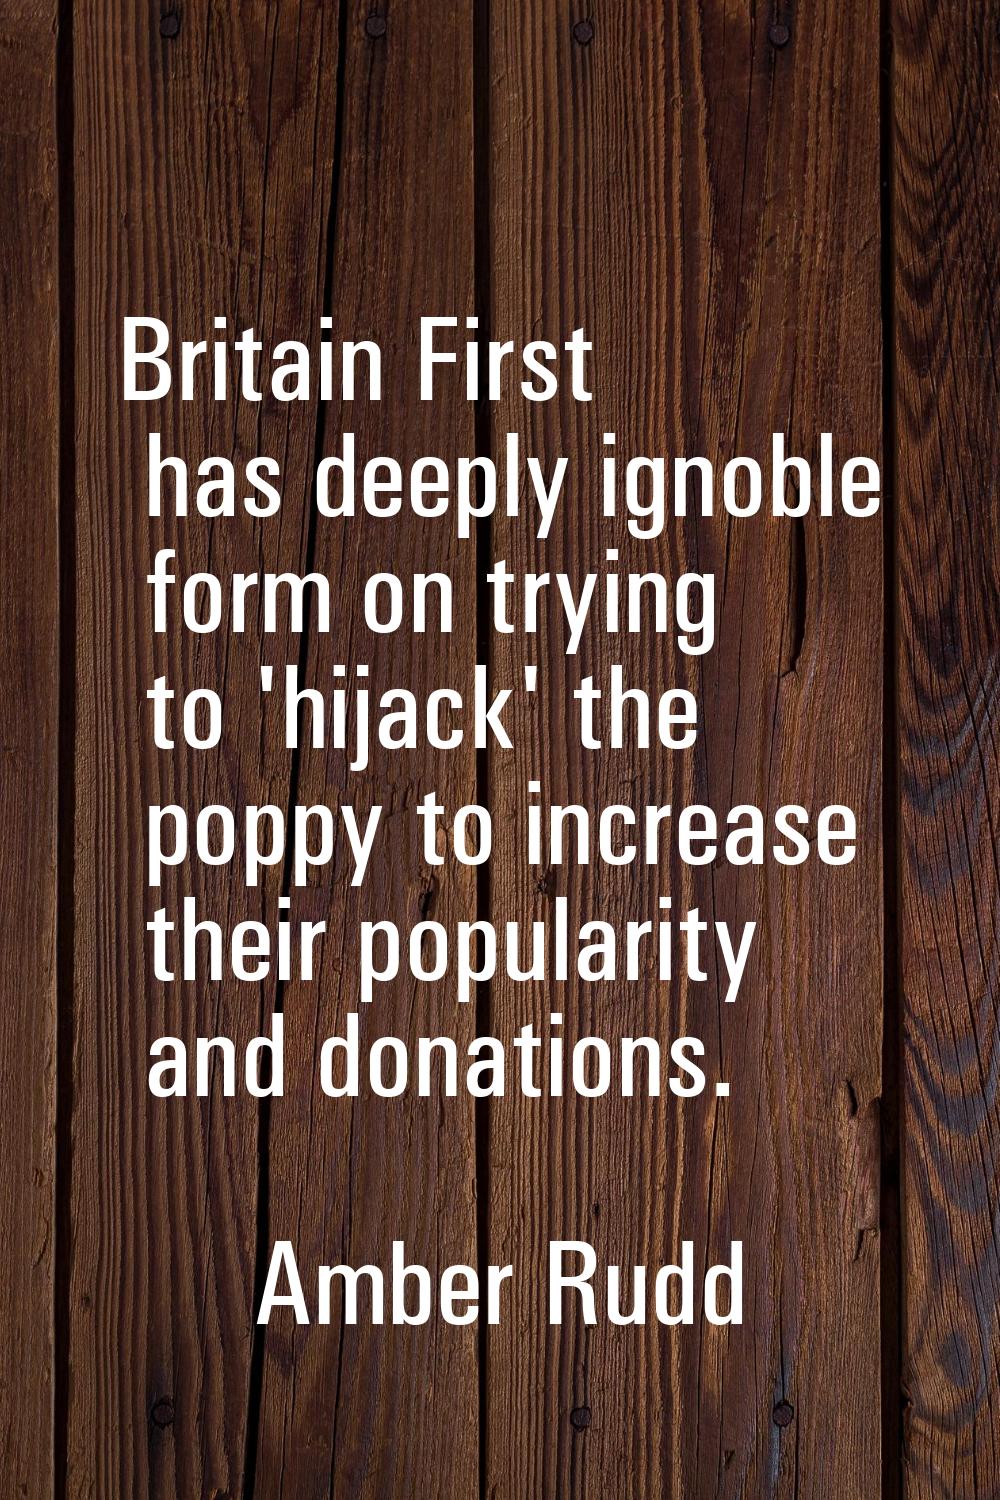 Britain First has deeply ignoble form on trying to 'hijack' the poppy to increase their popularity 